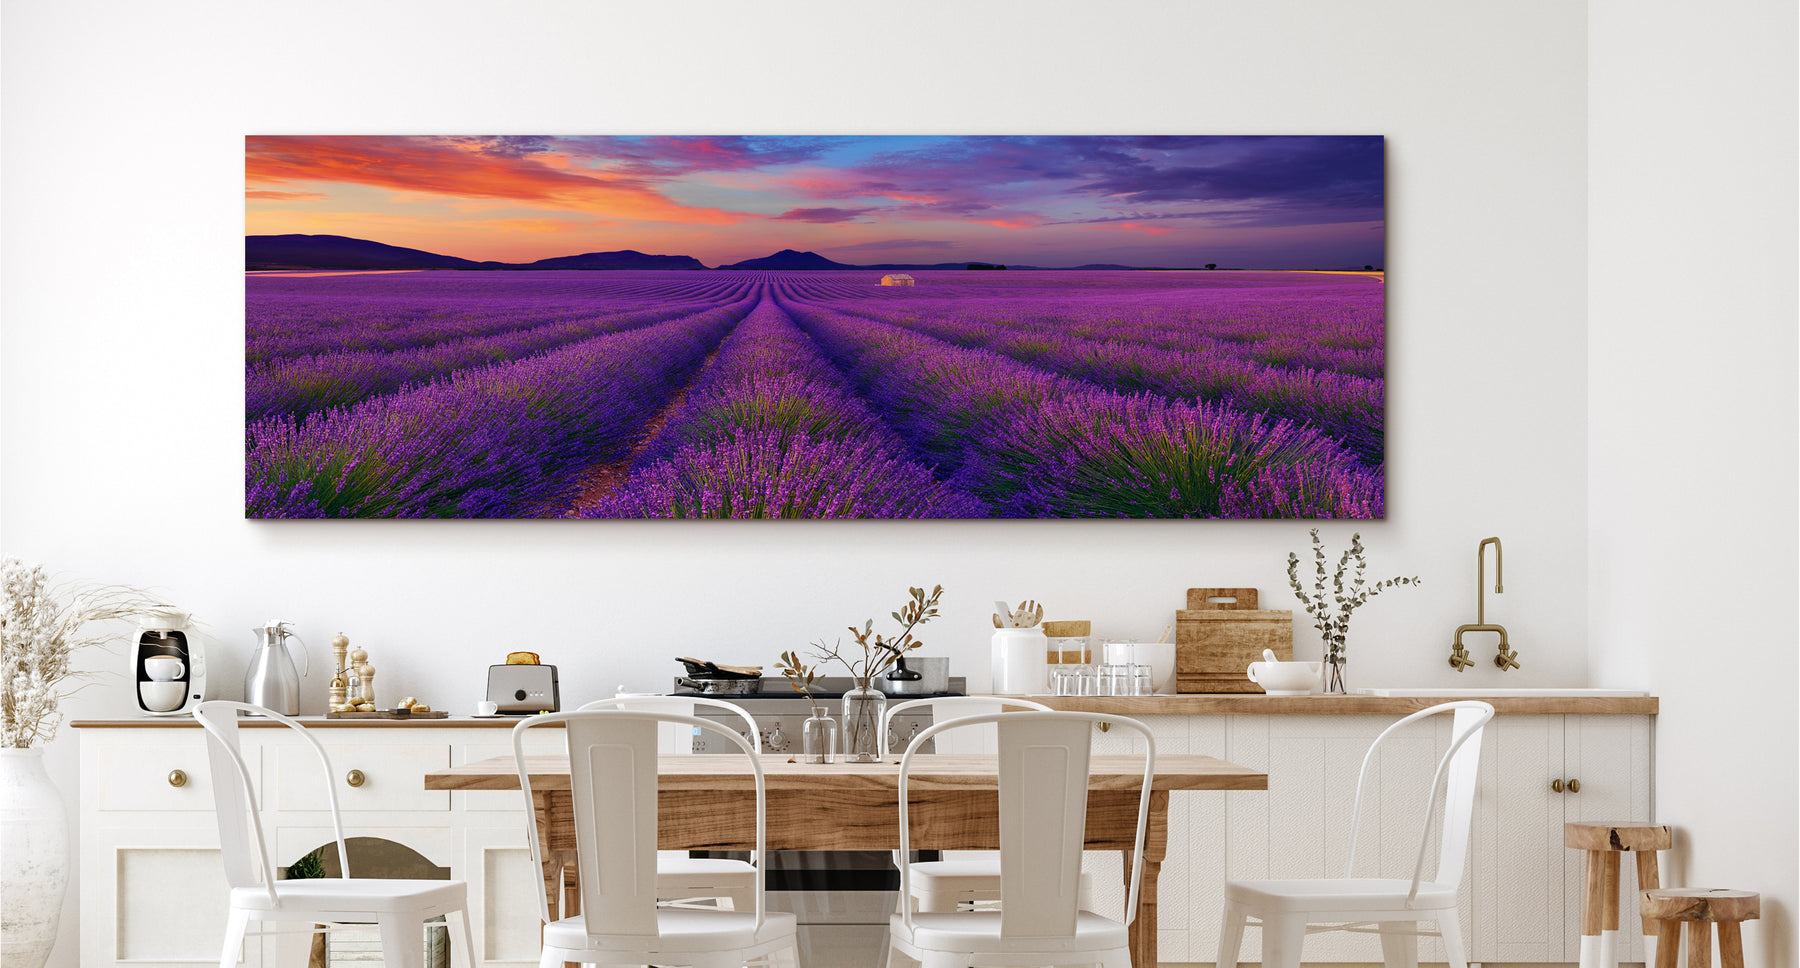 Peter Lik image of purple rows of lavender leading to a shack and mountains under a cloudy sky at sunset in Valensole France hanging on the wall of a kitchen 